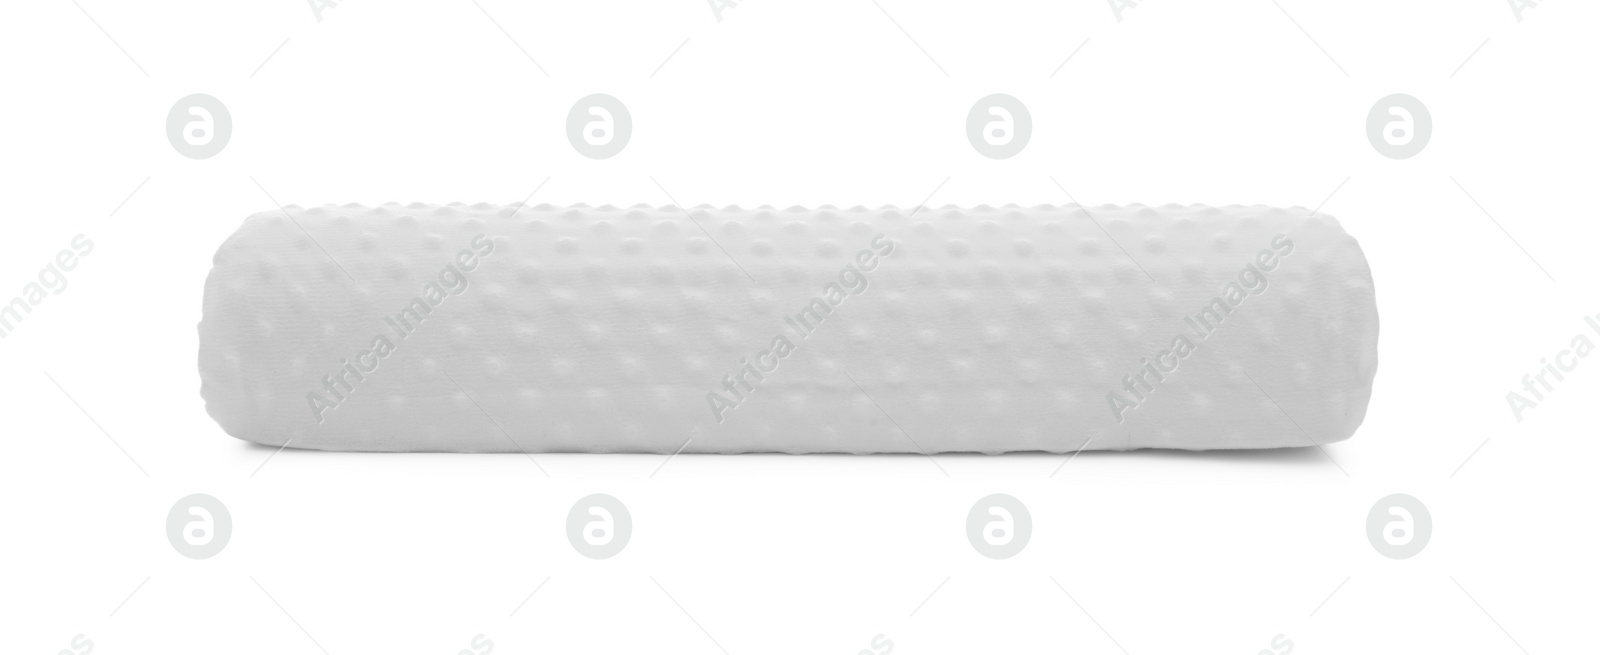 Photo of Orthopedic memory foam pillow isolated on white